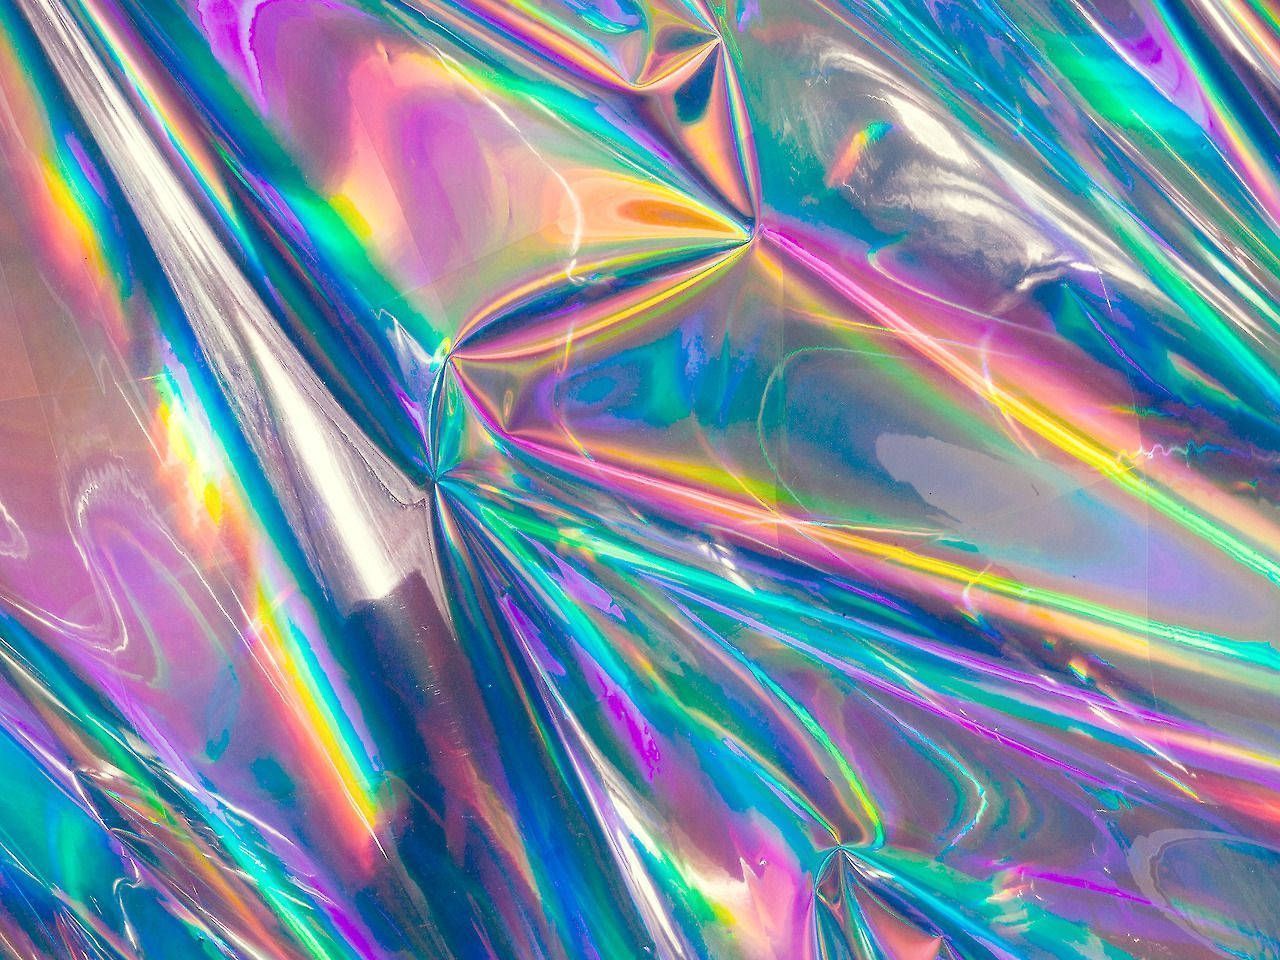 A crumpled piece of holographic plastic with rainbow colors. - Holographic